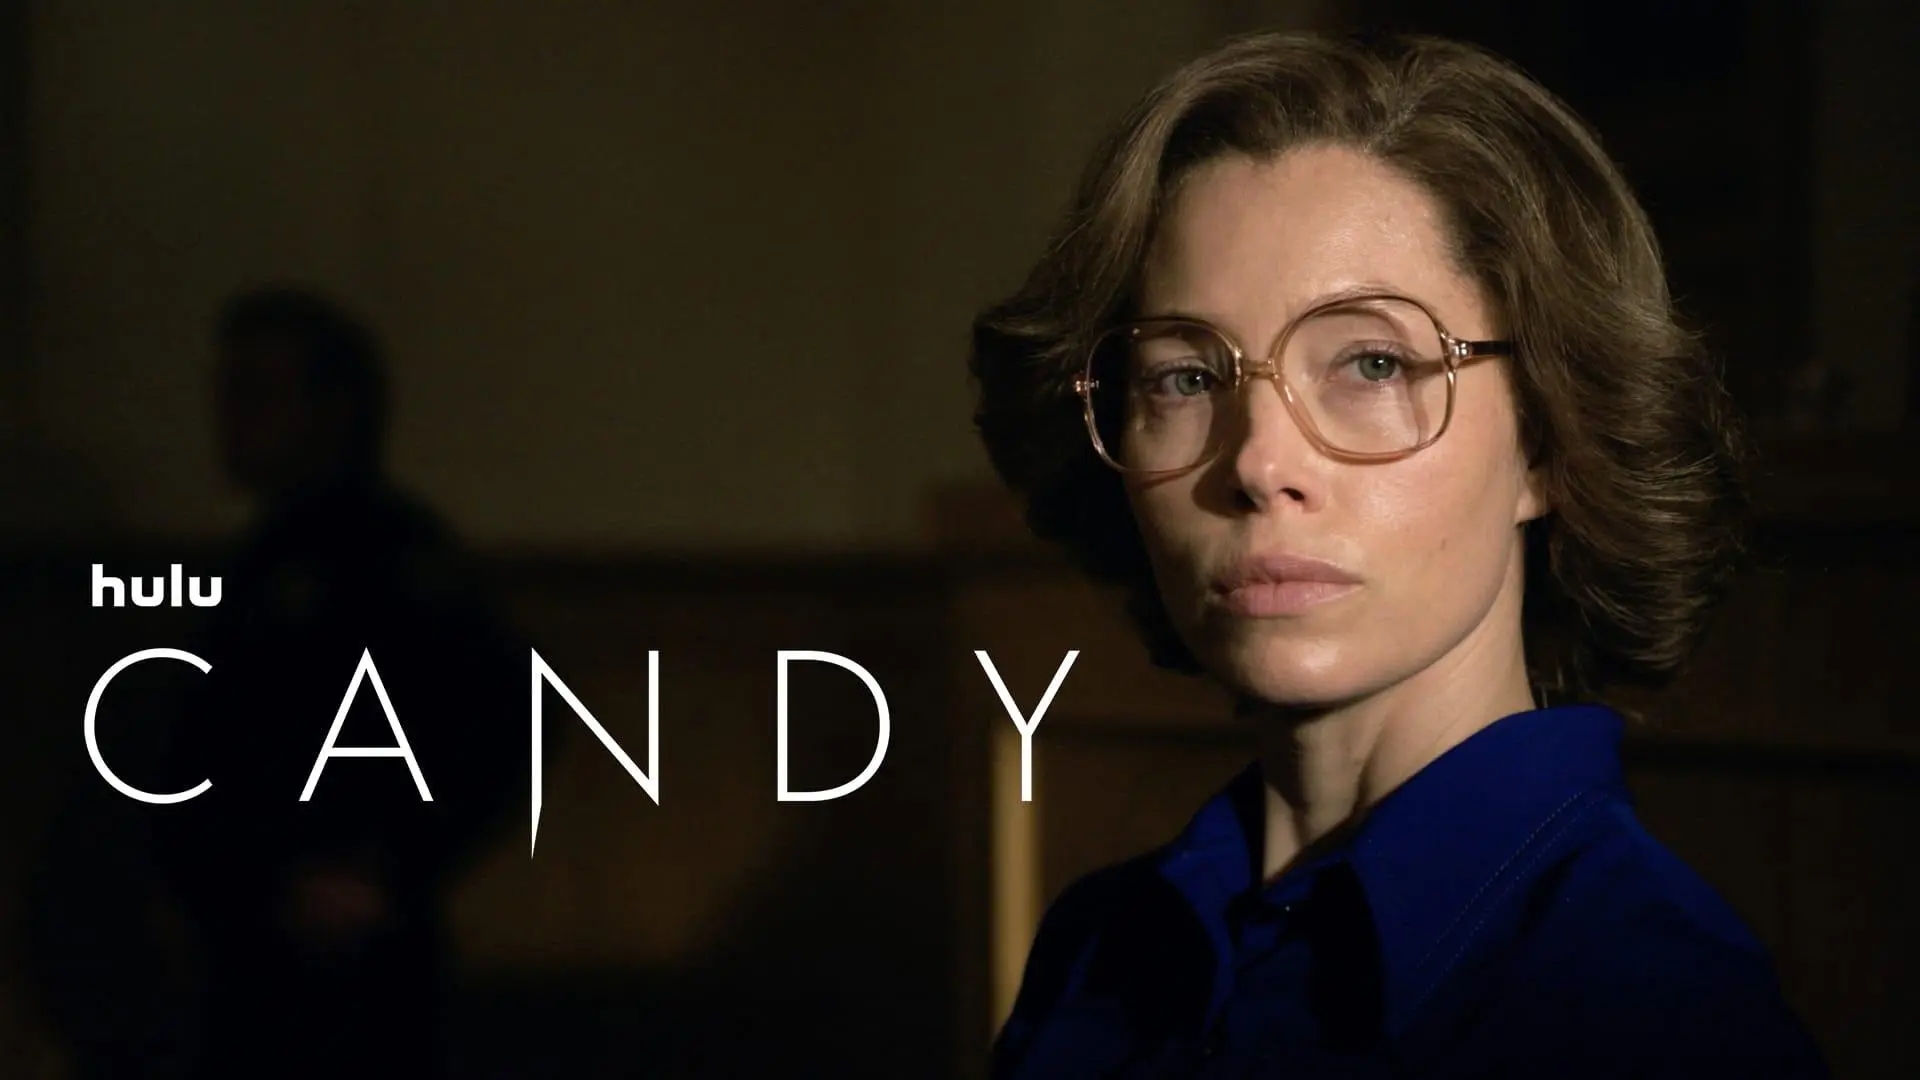 The title treatment for the murder mystery Hulu series Candy